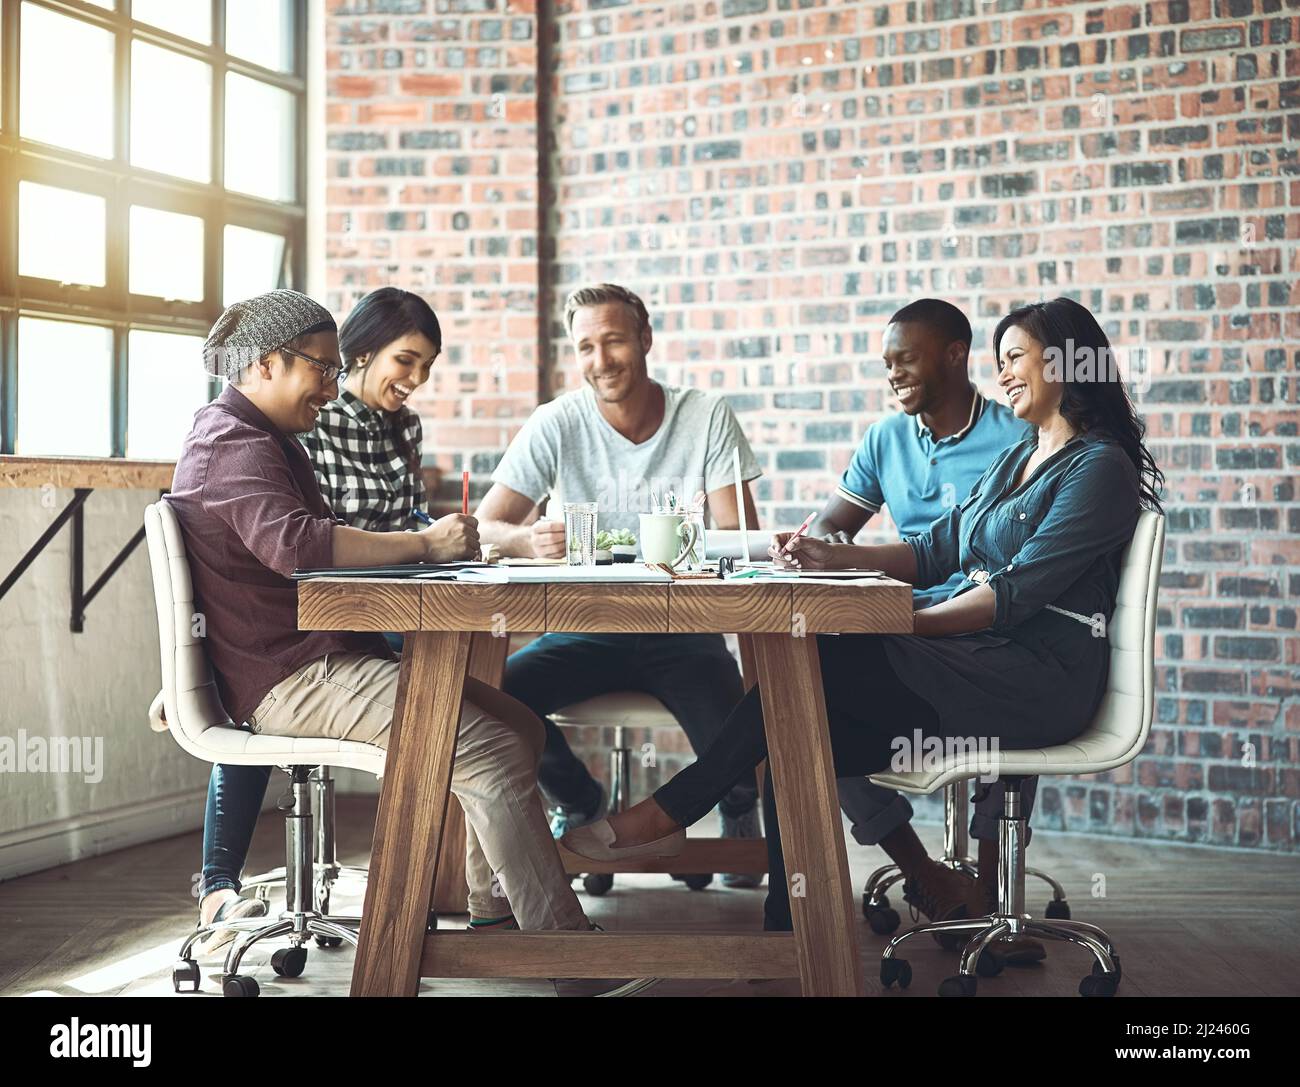 Team. Together everyone achieves more. Shot of a team of entrepreneurs collaborating in a modern office. Stock Photo